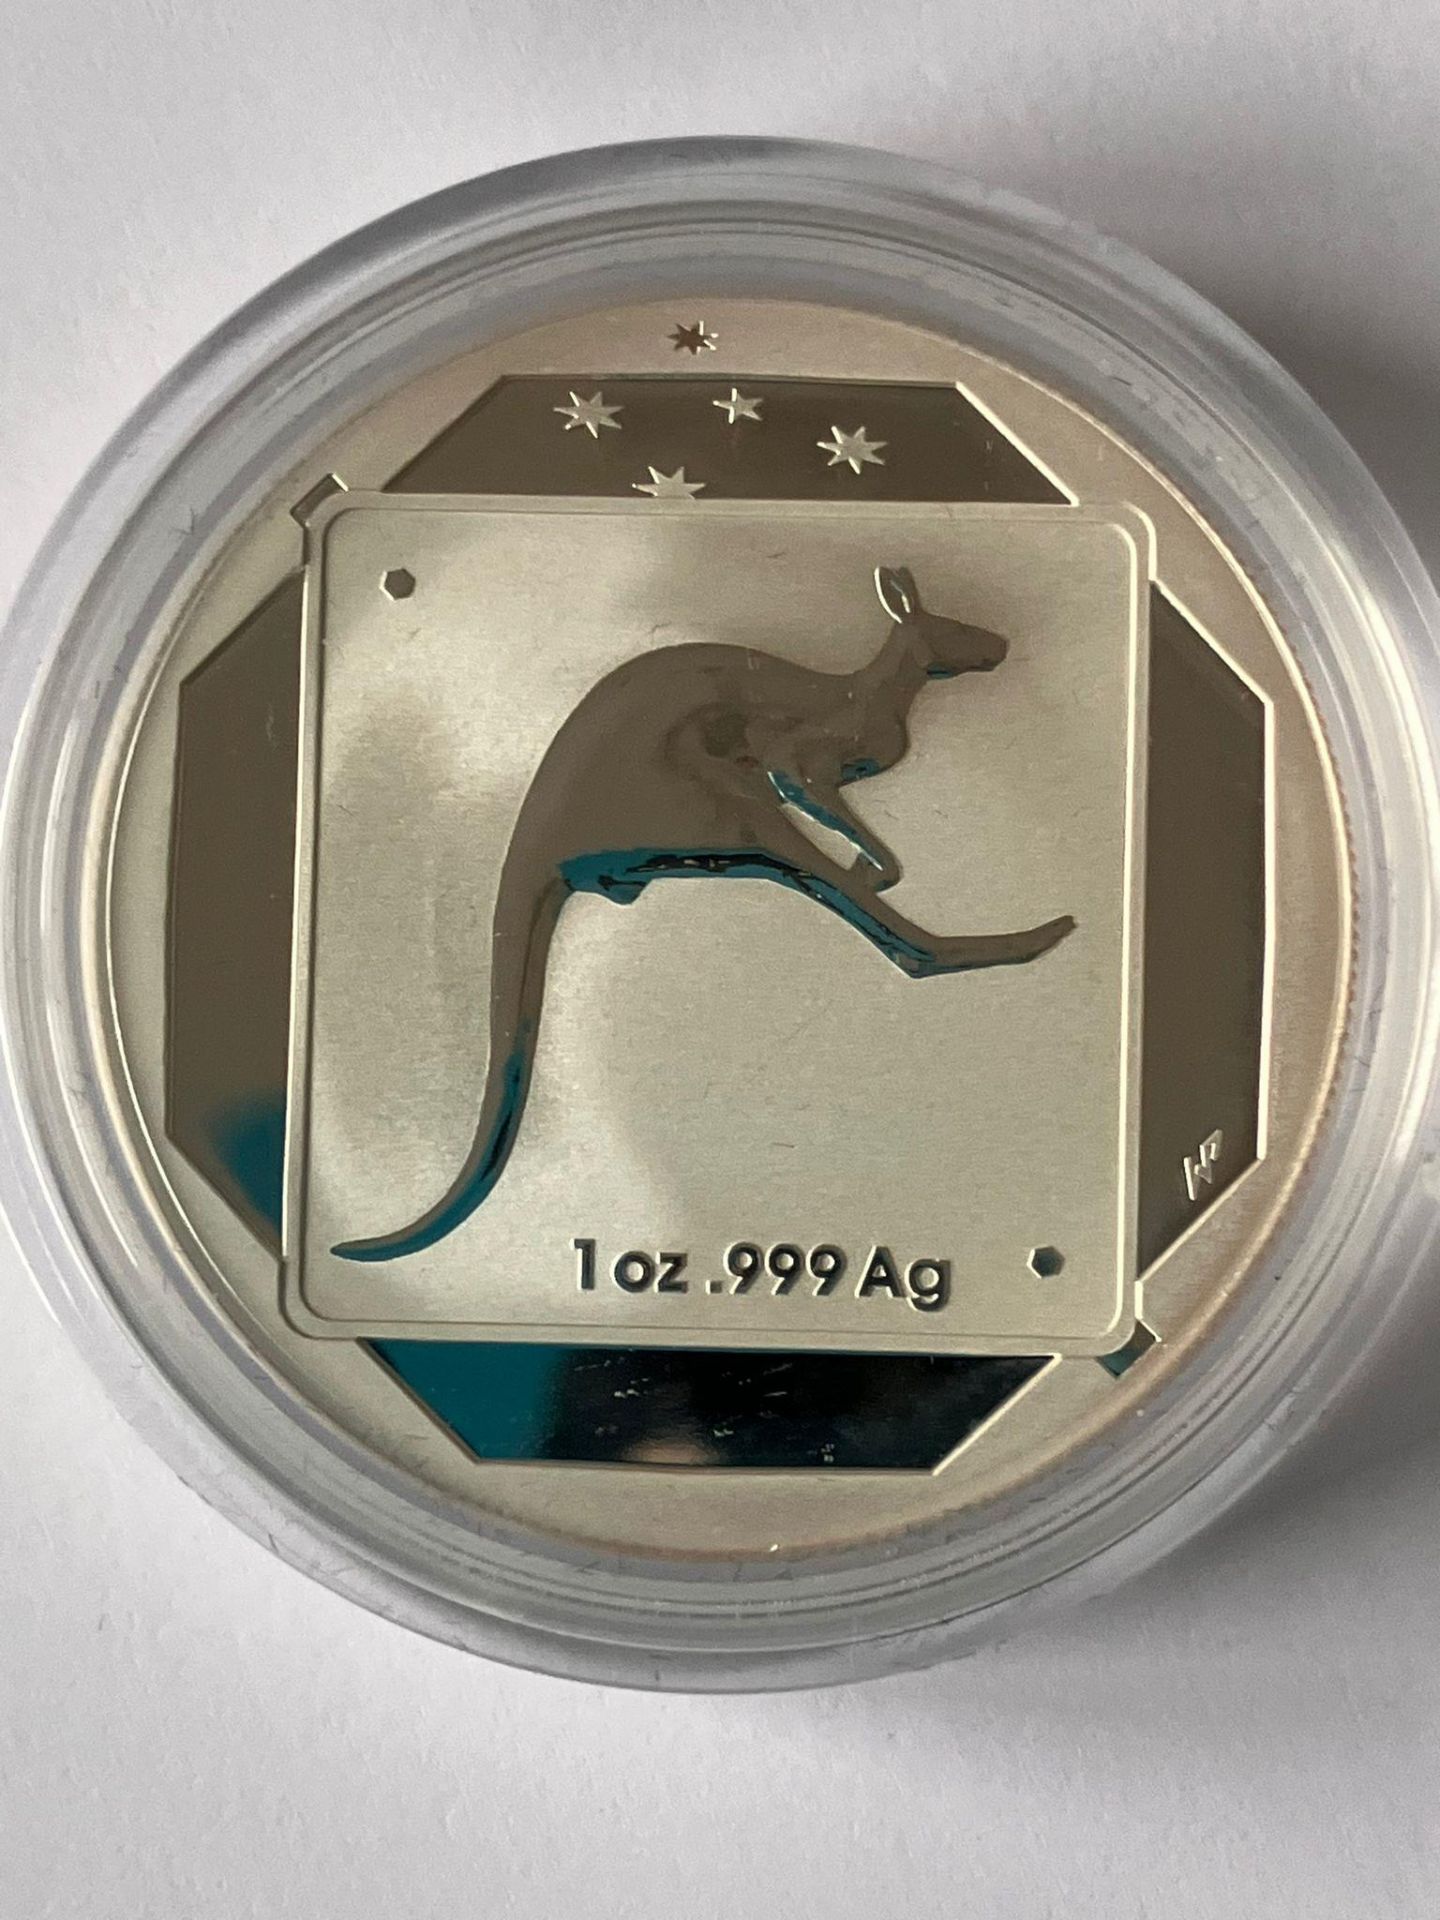 2013 SILVER AUSTRALIAN KANGAROO COIN. A limited edition PURE SILVER DOLLAR COIN struck by the - Image 9 of 9